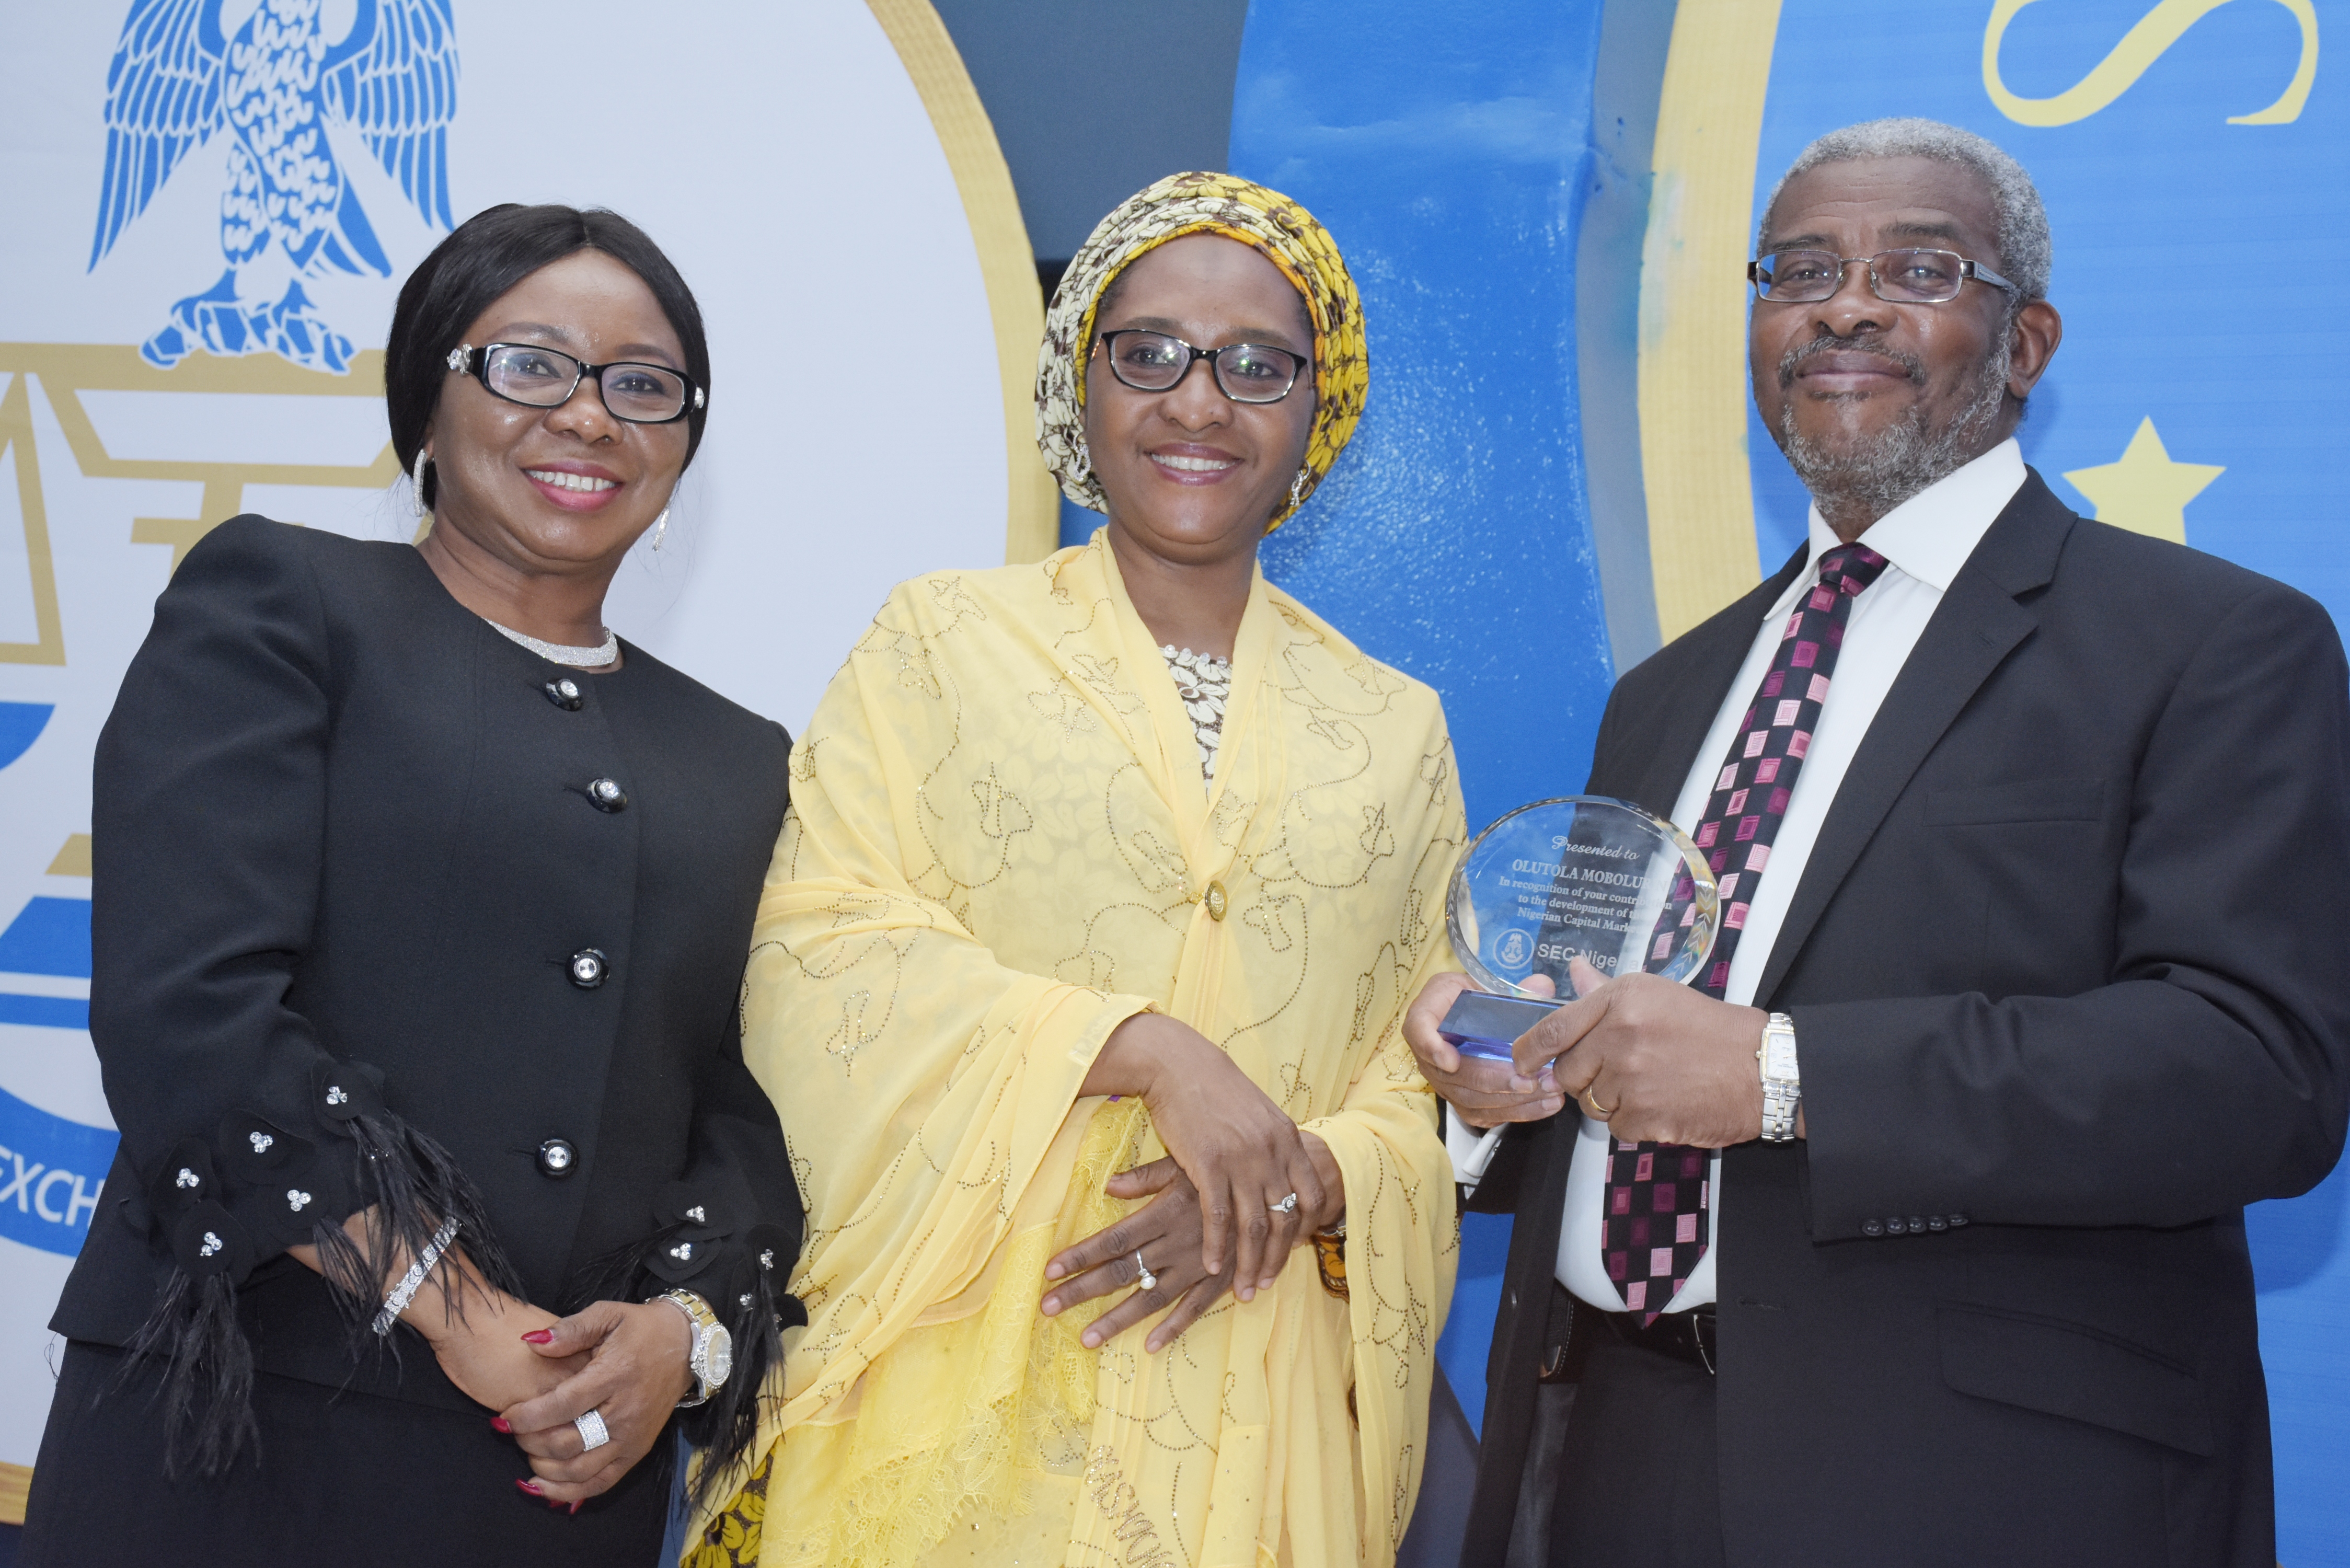 Chairman, Capital Market Masterplan Implementation Council, (CAMMIC), Mr Olutola Mobolurin receives an award plaque from the Minister of Finance, Mrs Zainab Ahmed, supported by the Ag. Director-General, Securities and Exchange Commission, Ms Mary Uduk, (left) at the SEC Awards Night in Lagos on Tuesday, March 19, 2019.